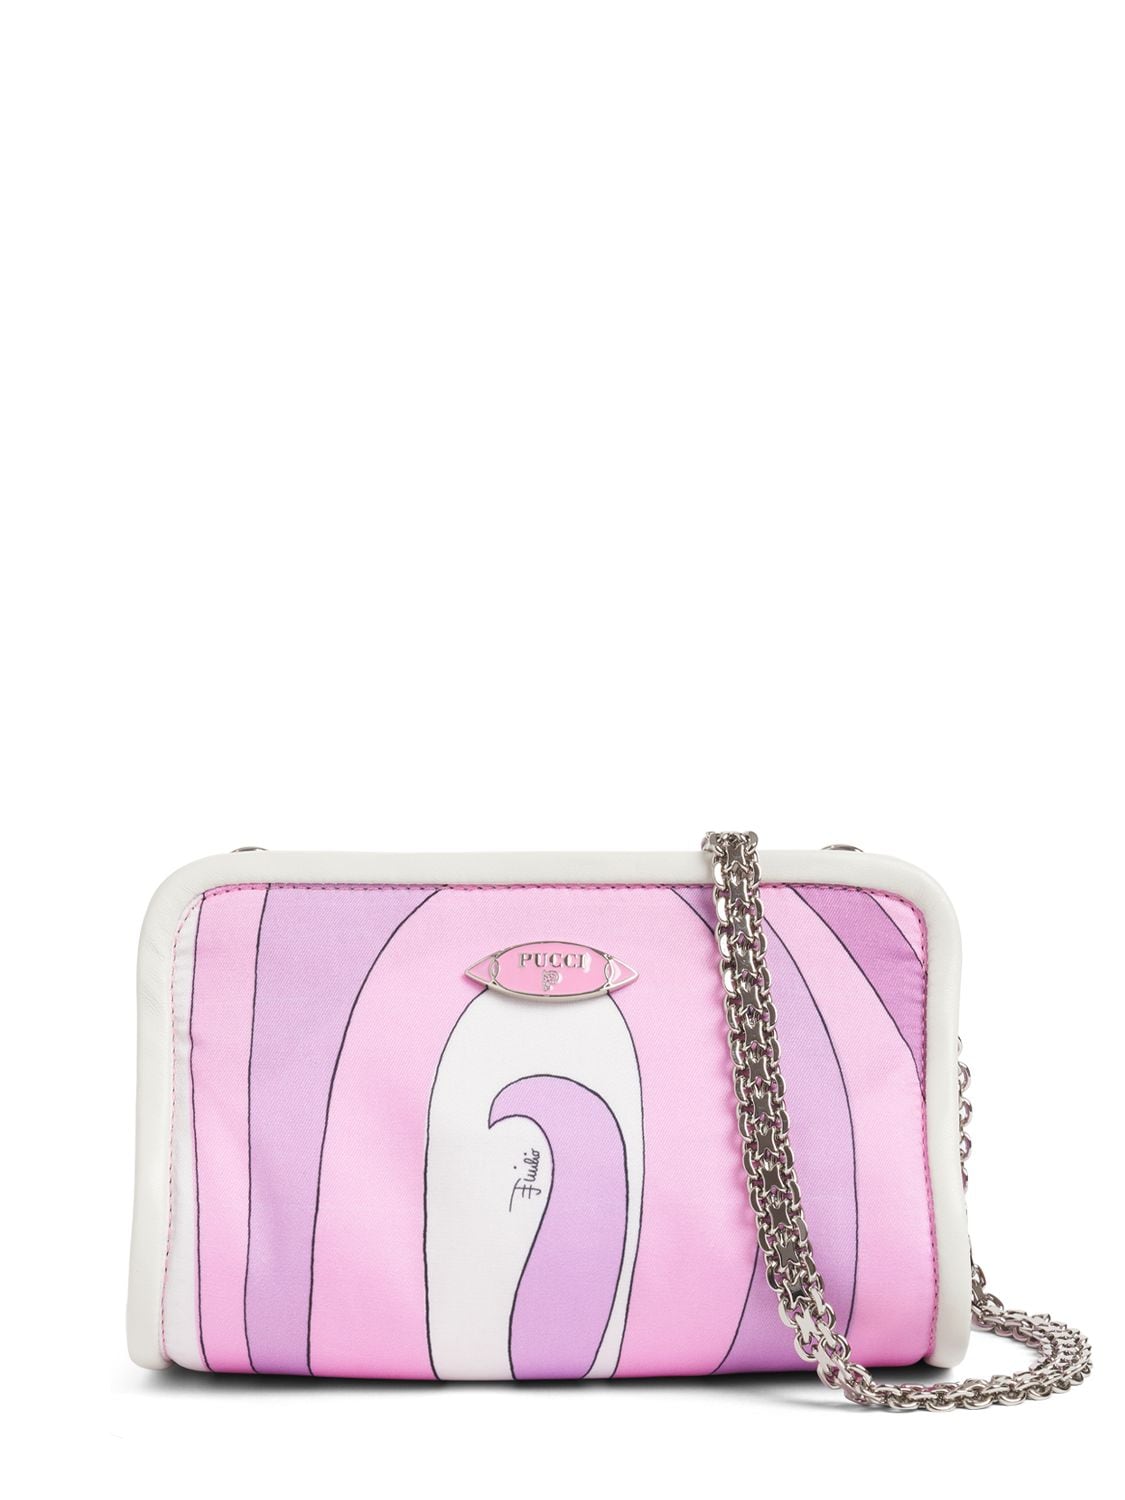 Pucci Printed Twill Binding Pouch In Peonia